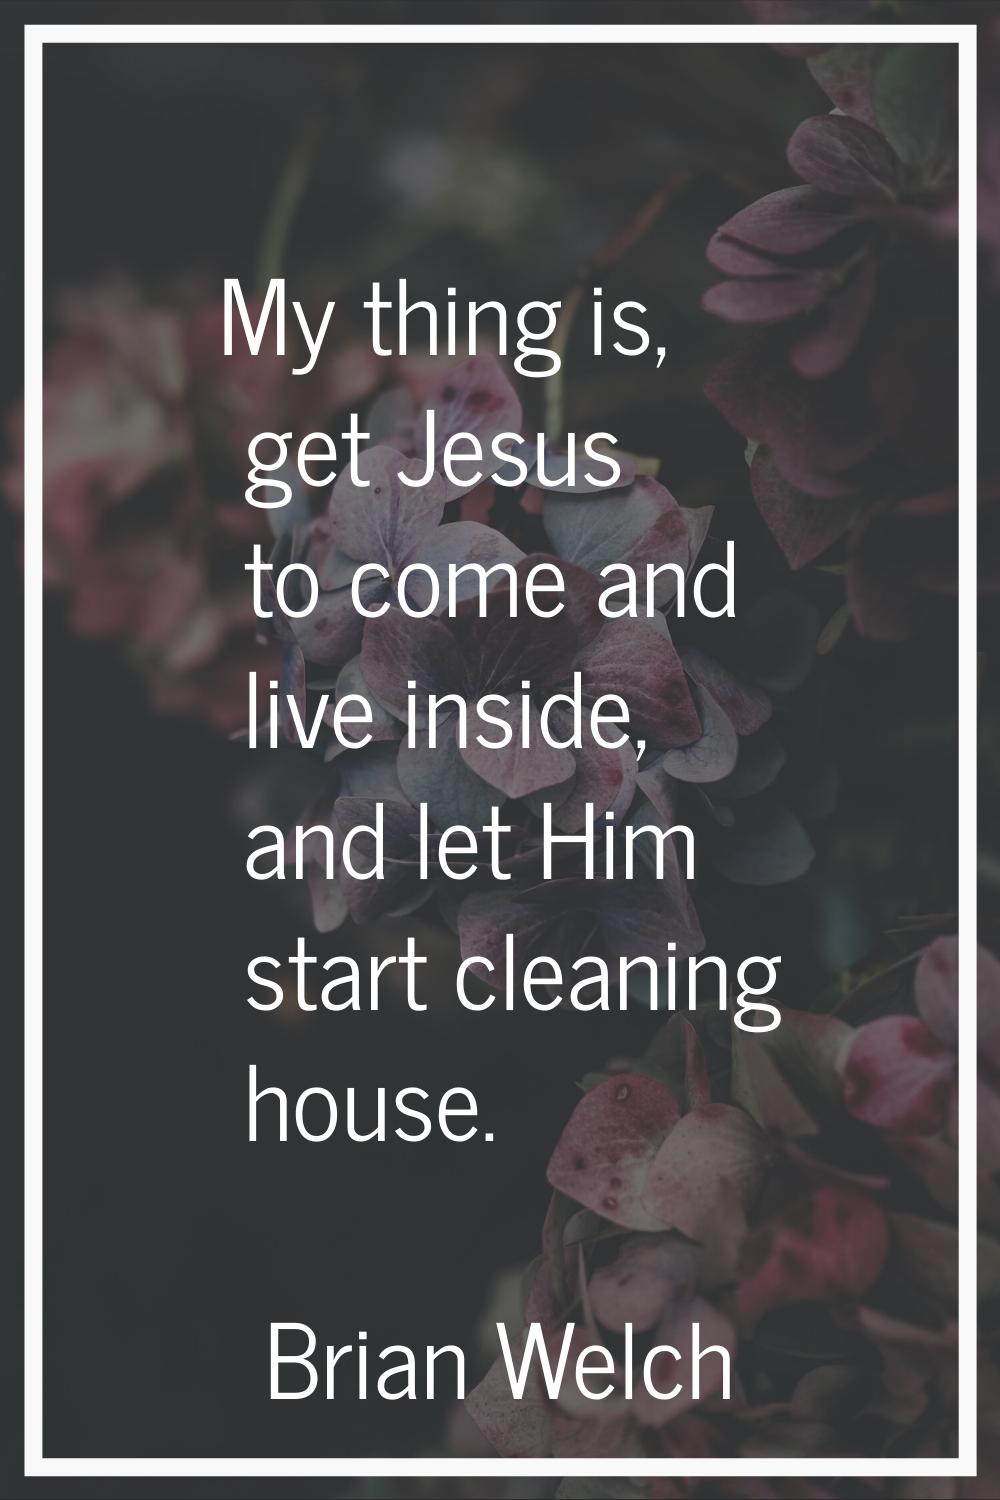 My thing is, get Jesus to come and live inside, and let Him start cleaning house.